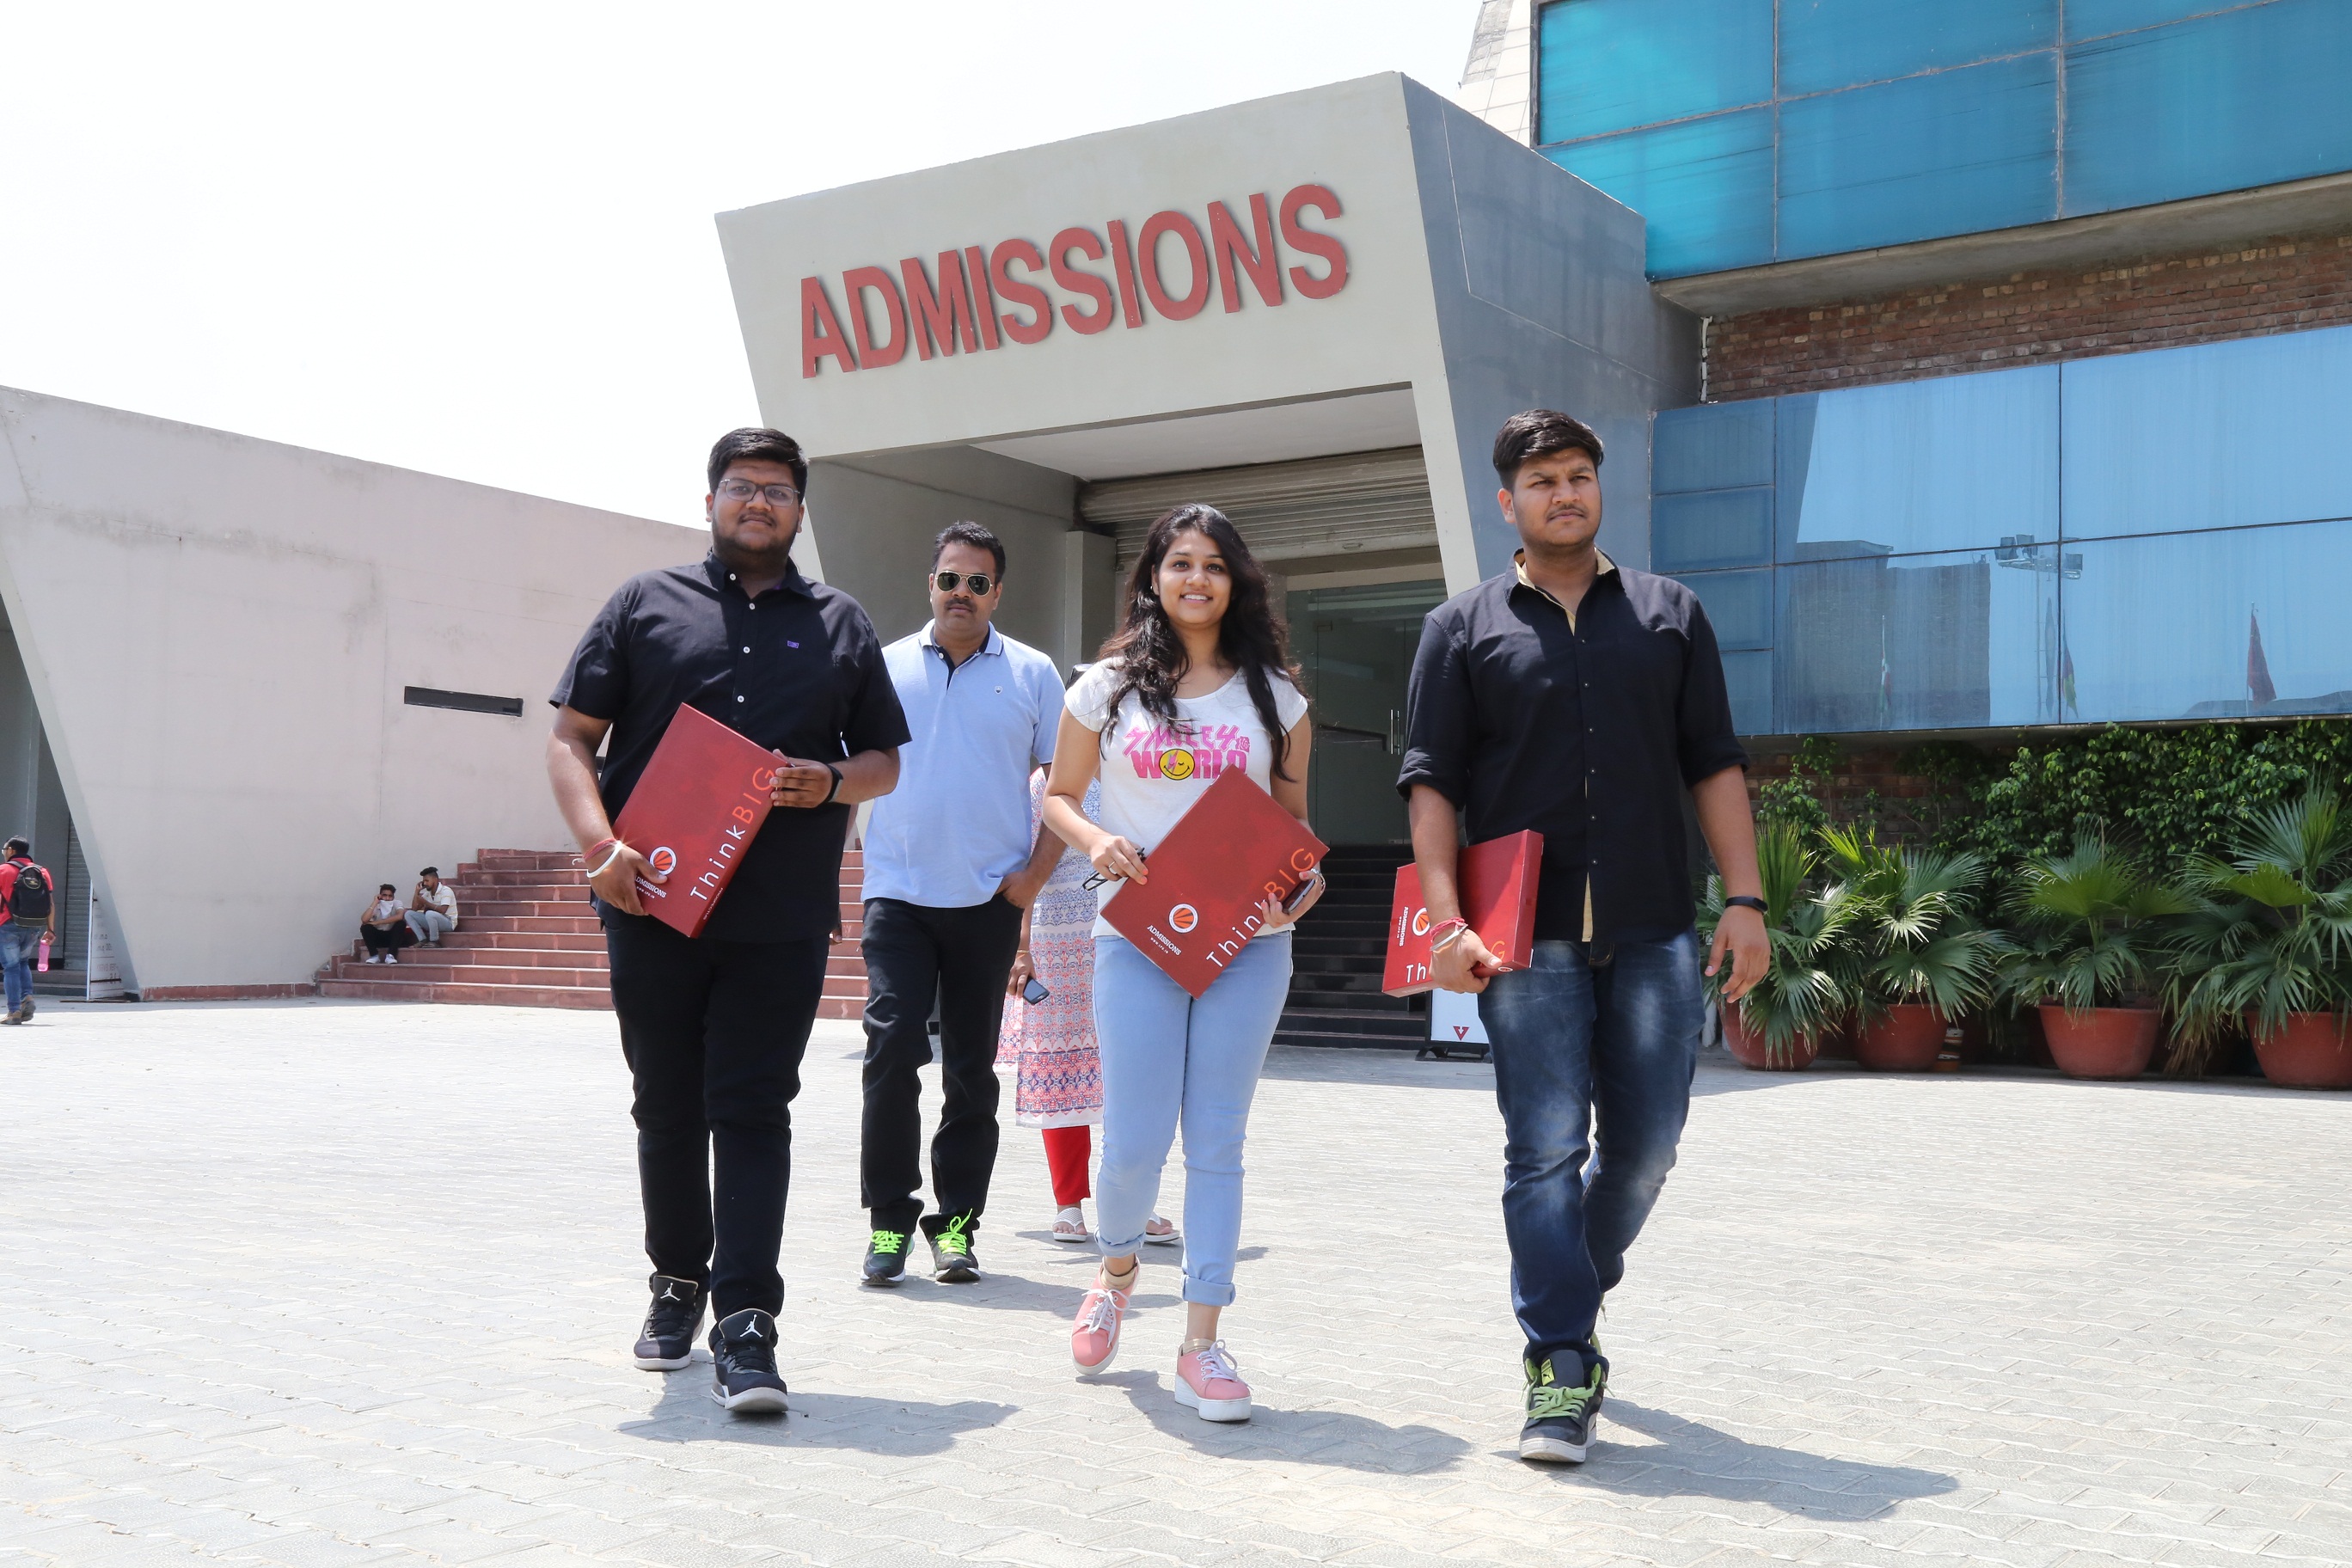 Students are looking jubilant on availing scholarship before June 30 at LPU campus